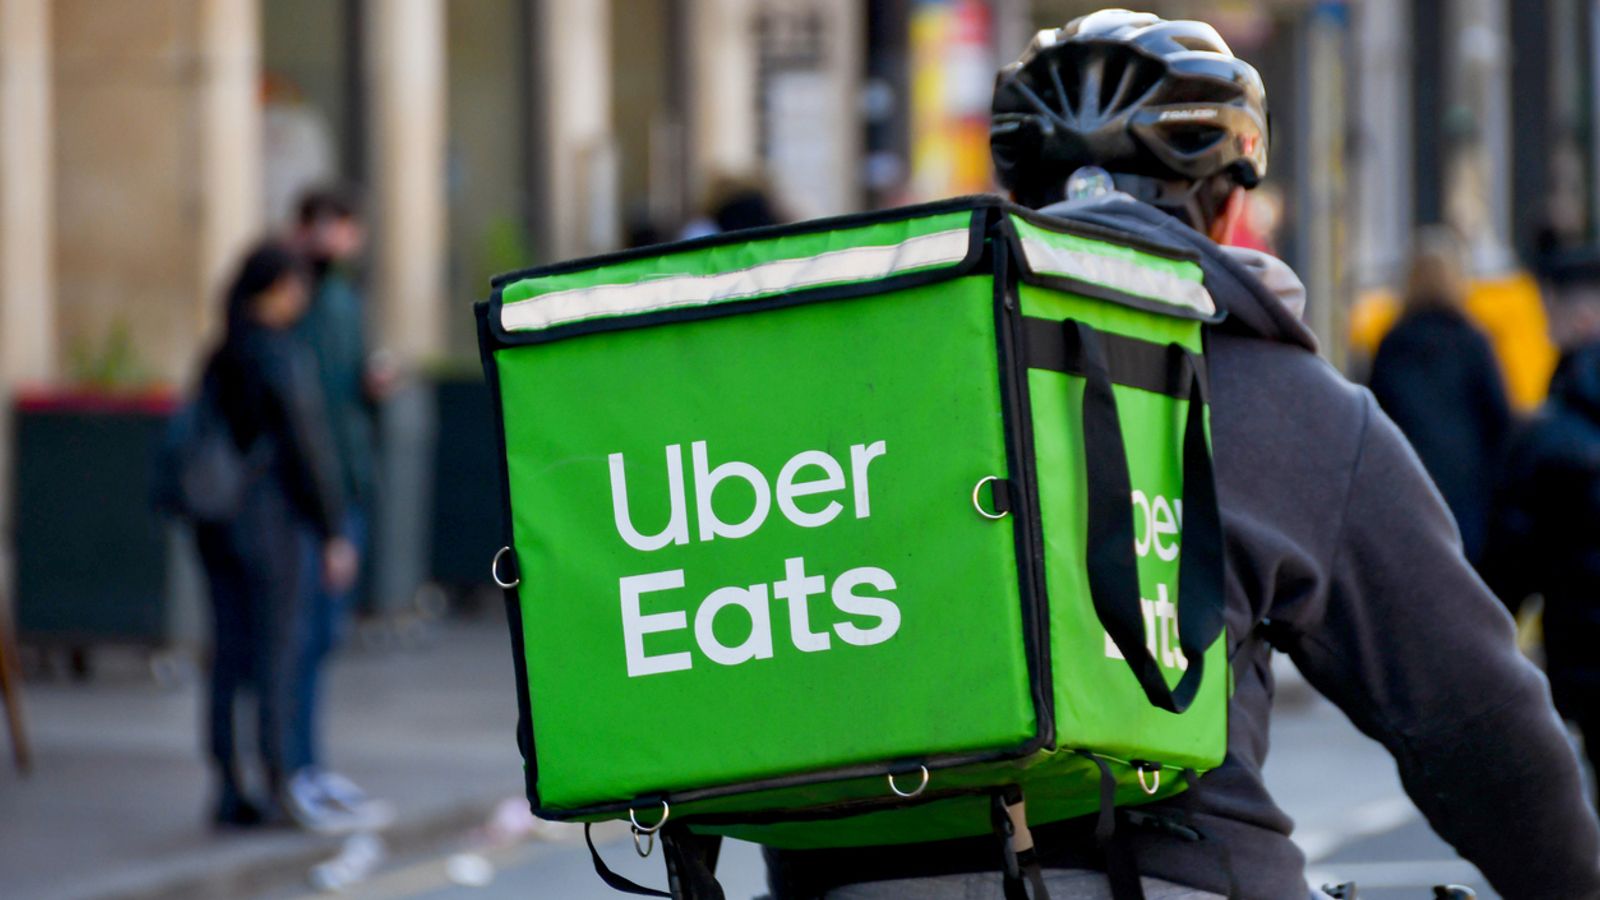 Uber Eats couriers to use zero emission vehicles by 2040 | Business News